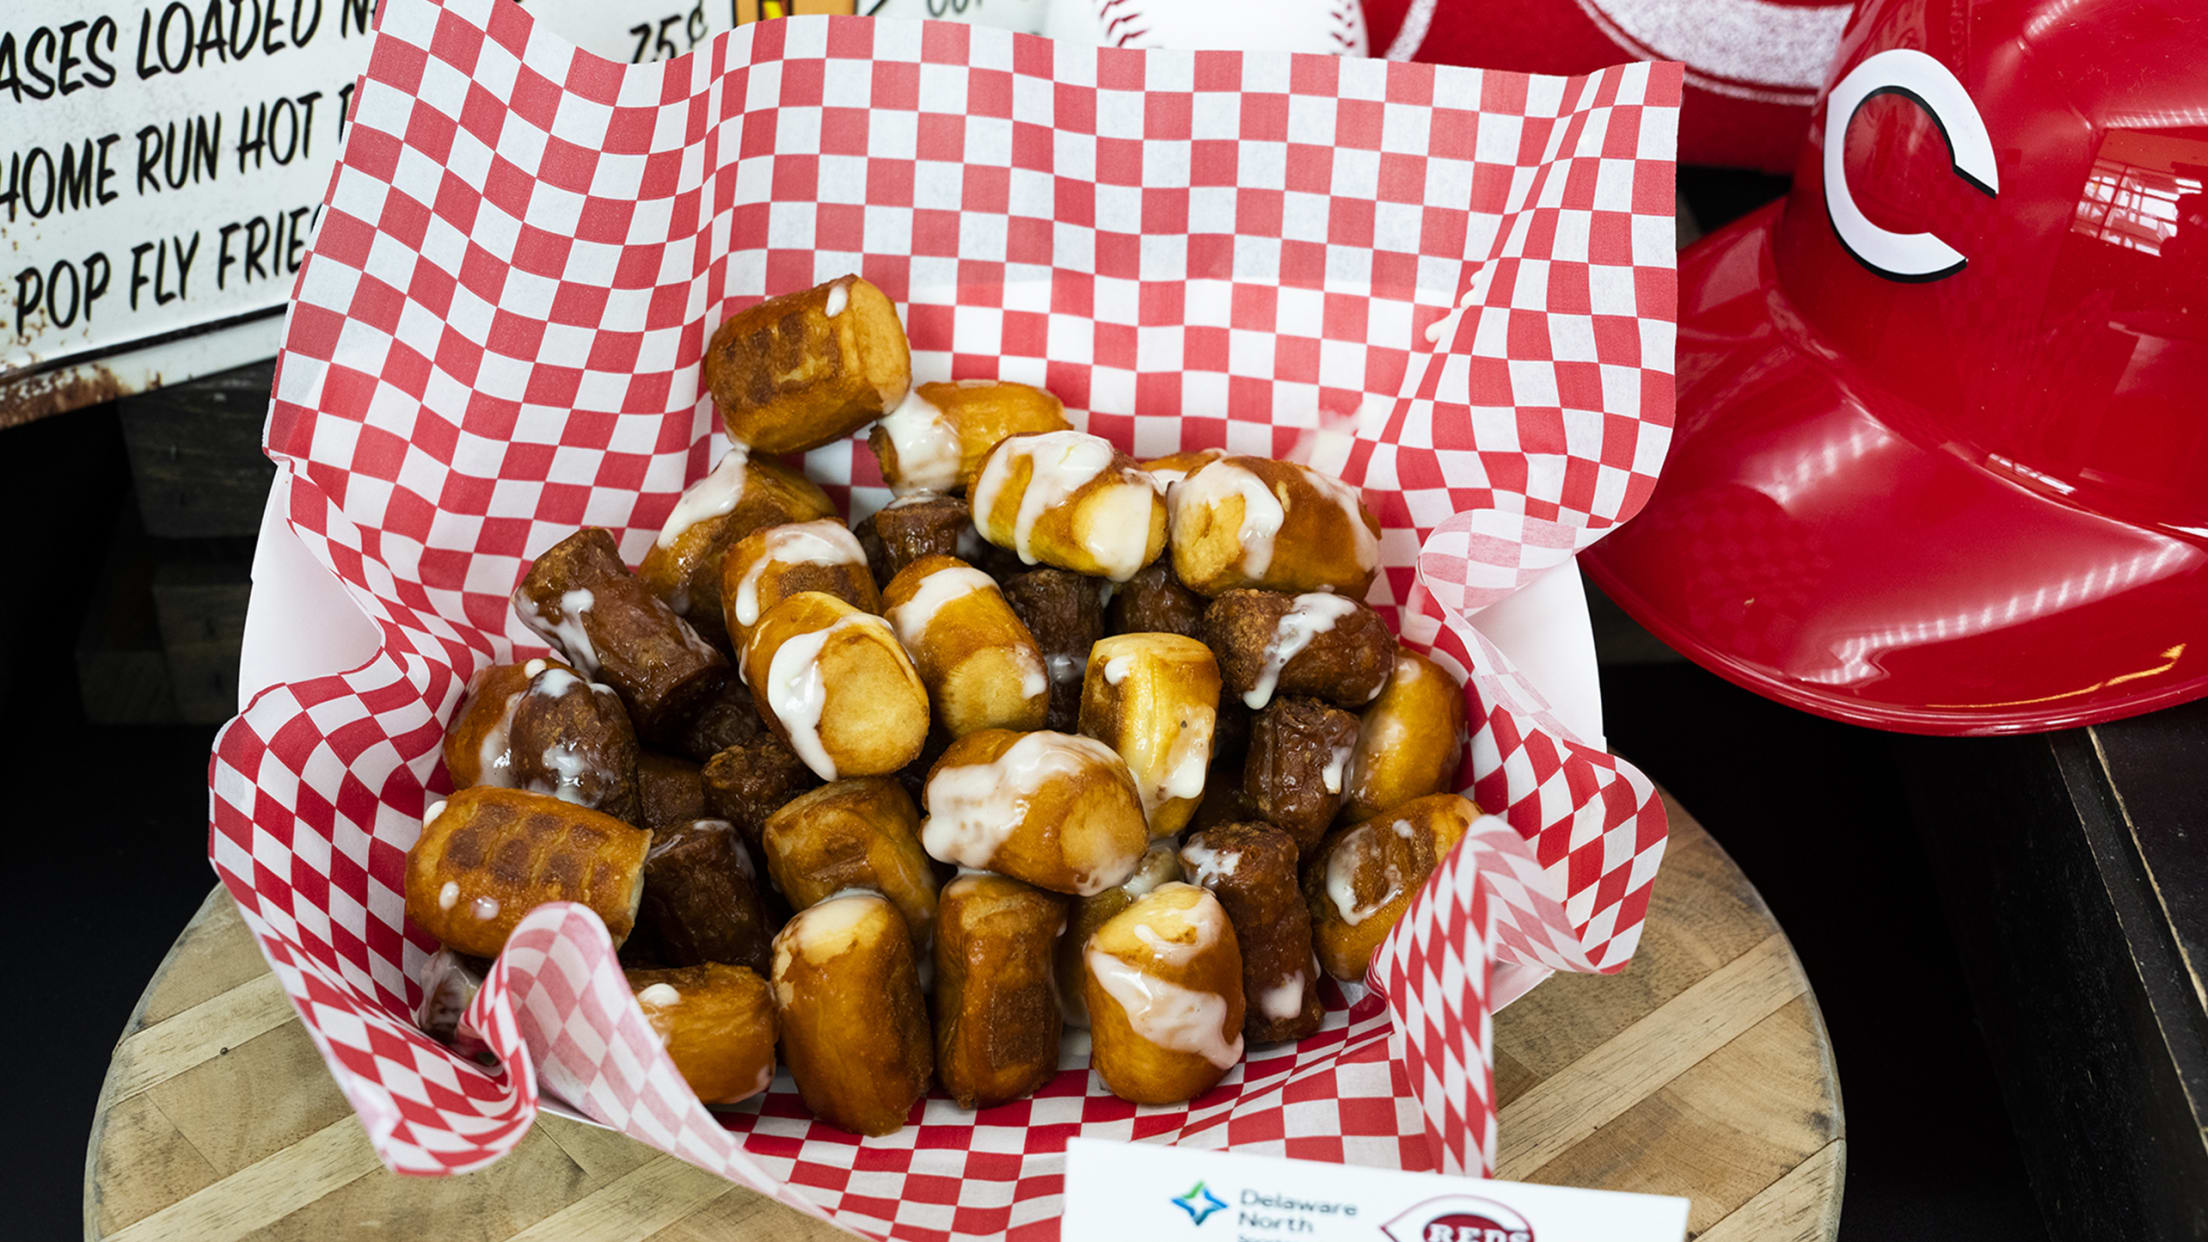 Where to Eat at Great American Ballpark, Home of the Cincinnati Reds - Eater